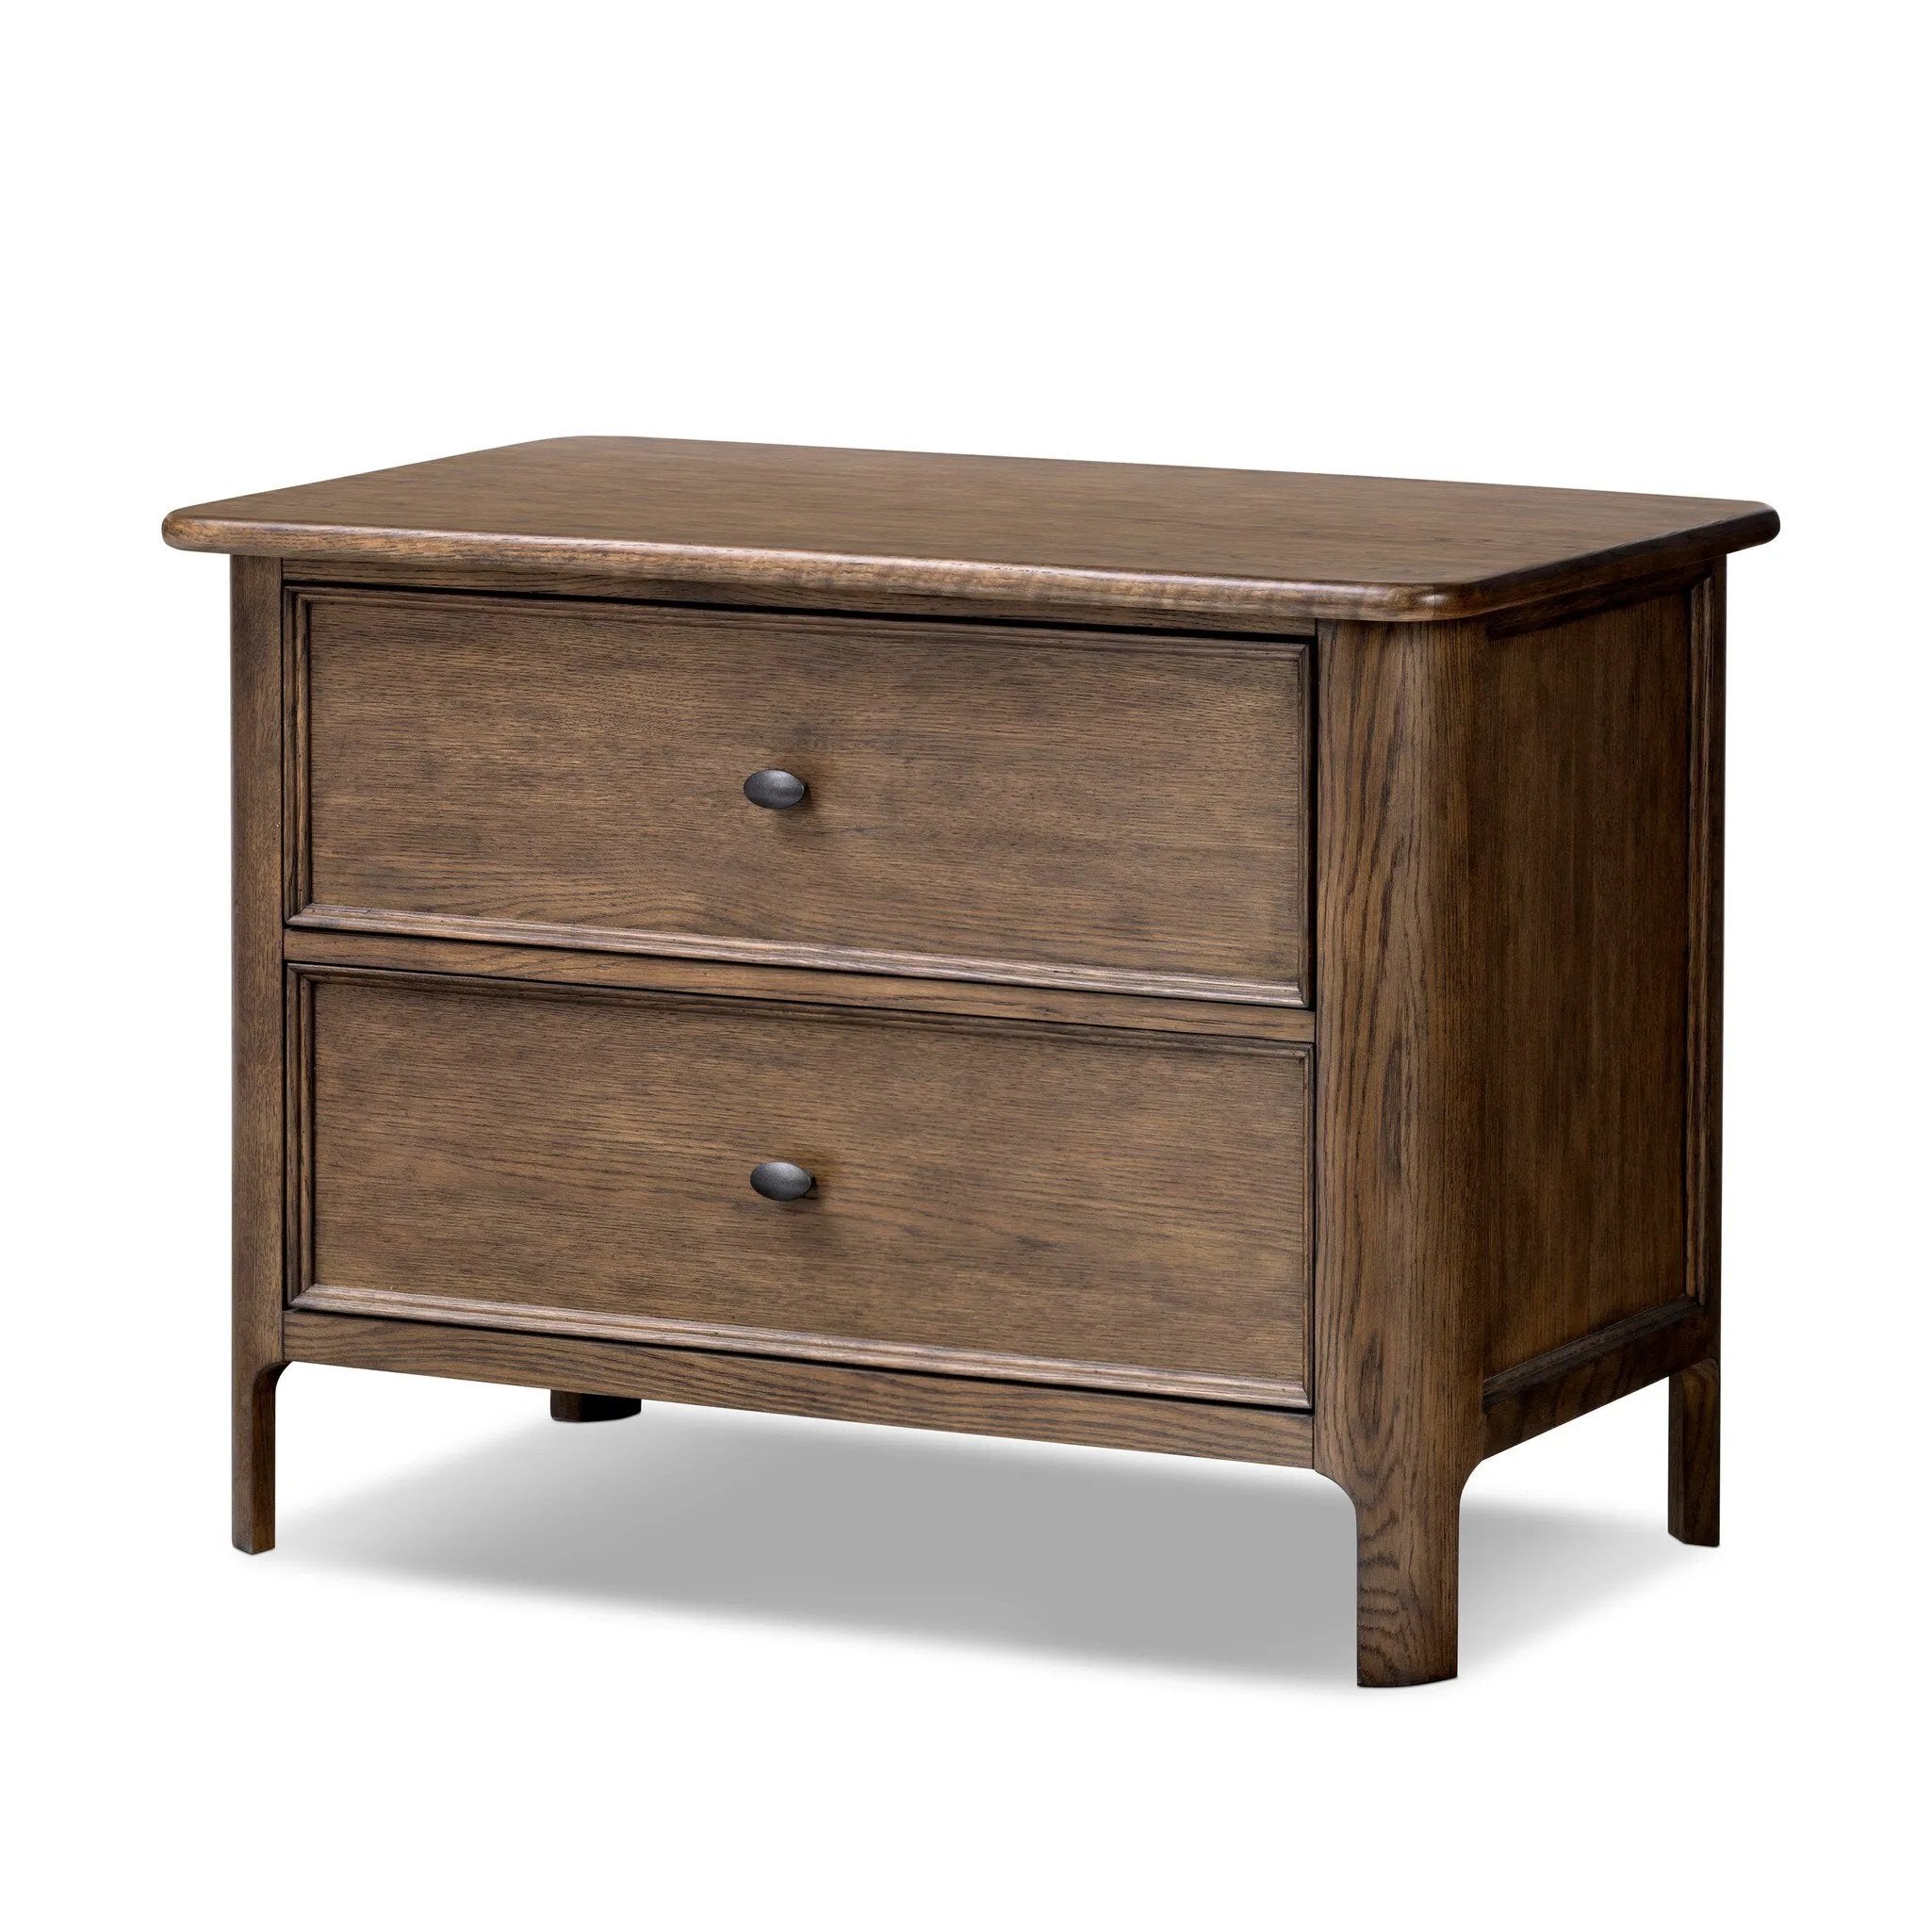 Like an heirloom nightstand with two roomy drawers, this aged oak design has room for it all. Detailed with an overhang surface, carved edges top to bottom, angled legs and oval drawer pulls finished in dark gunmetal.Collection: Bolto Amethyst Home provides interior design, new home construction design consulting, vintage area rugs, and lighting in the Houston metro area.